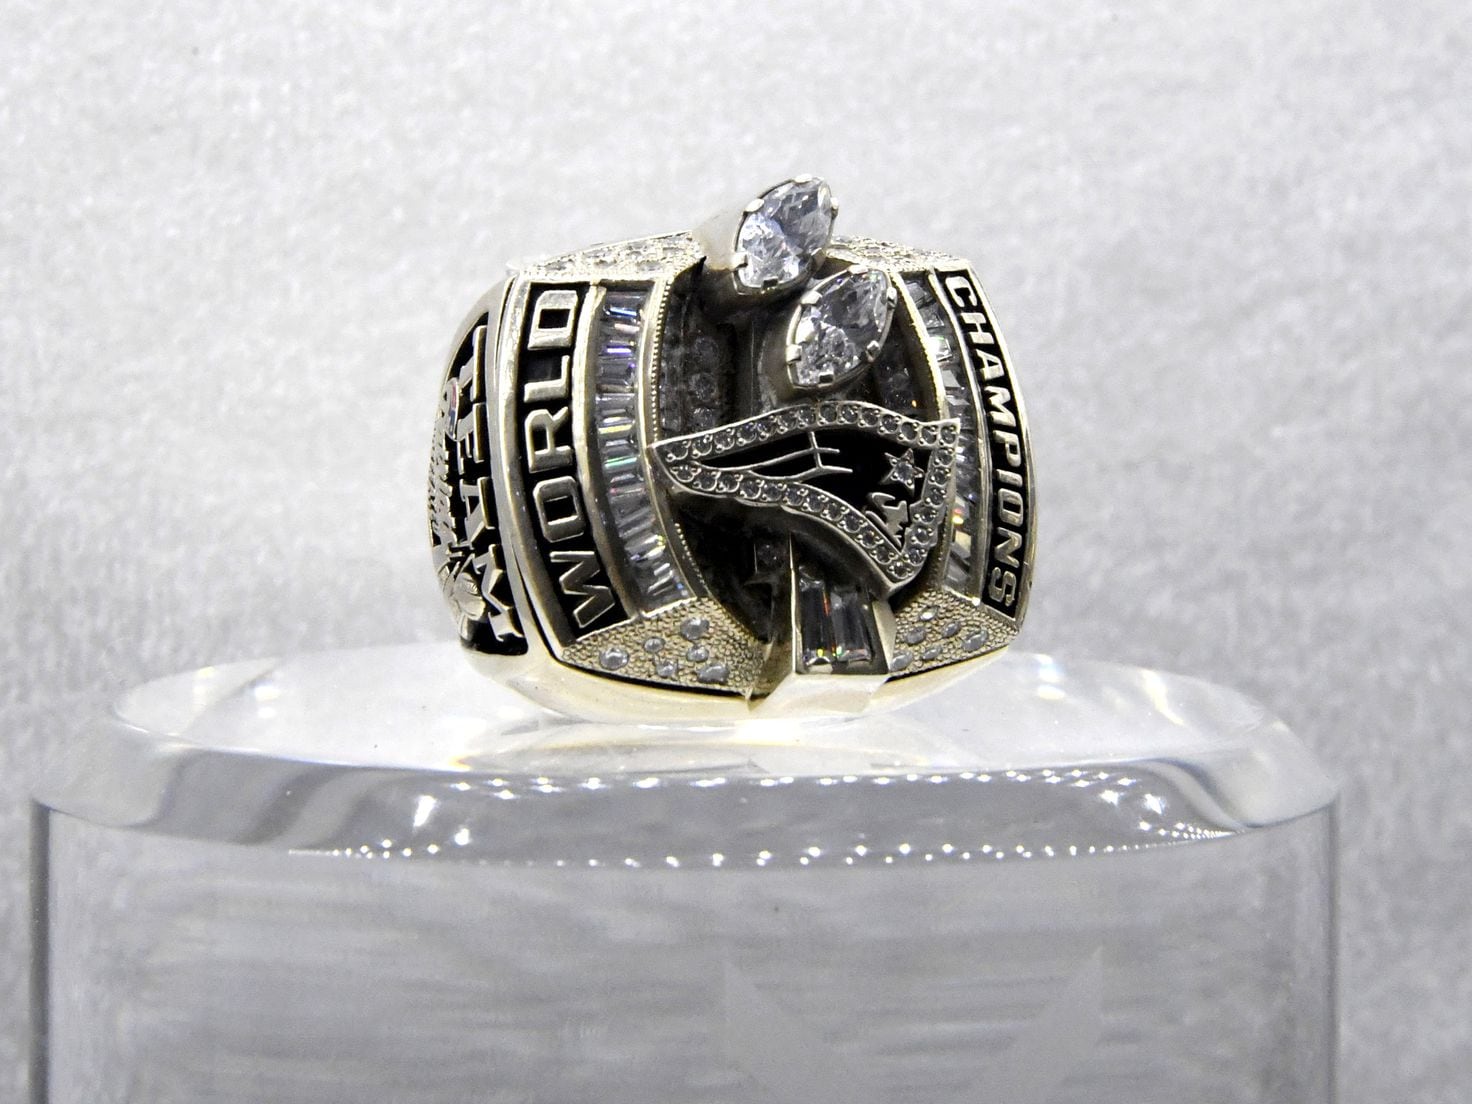 Former Saint Selling Super Bowl Ring, Check Out The Price